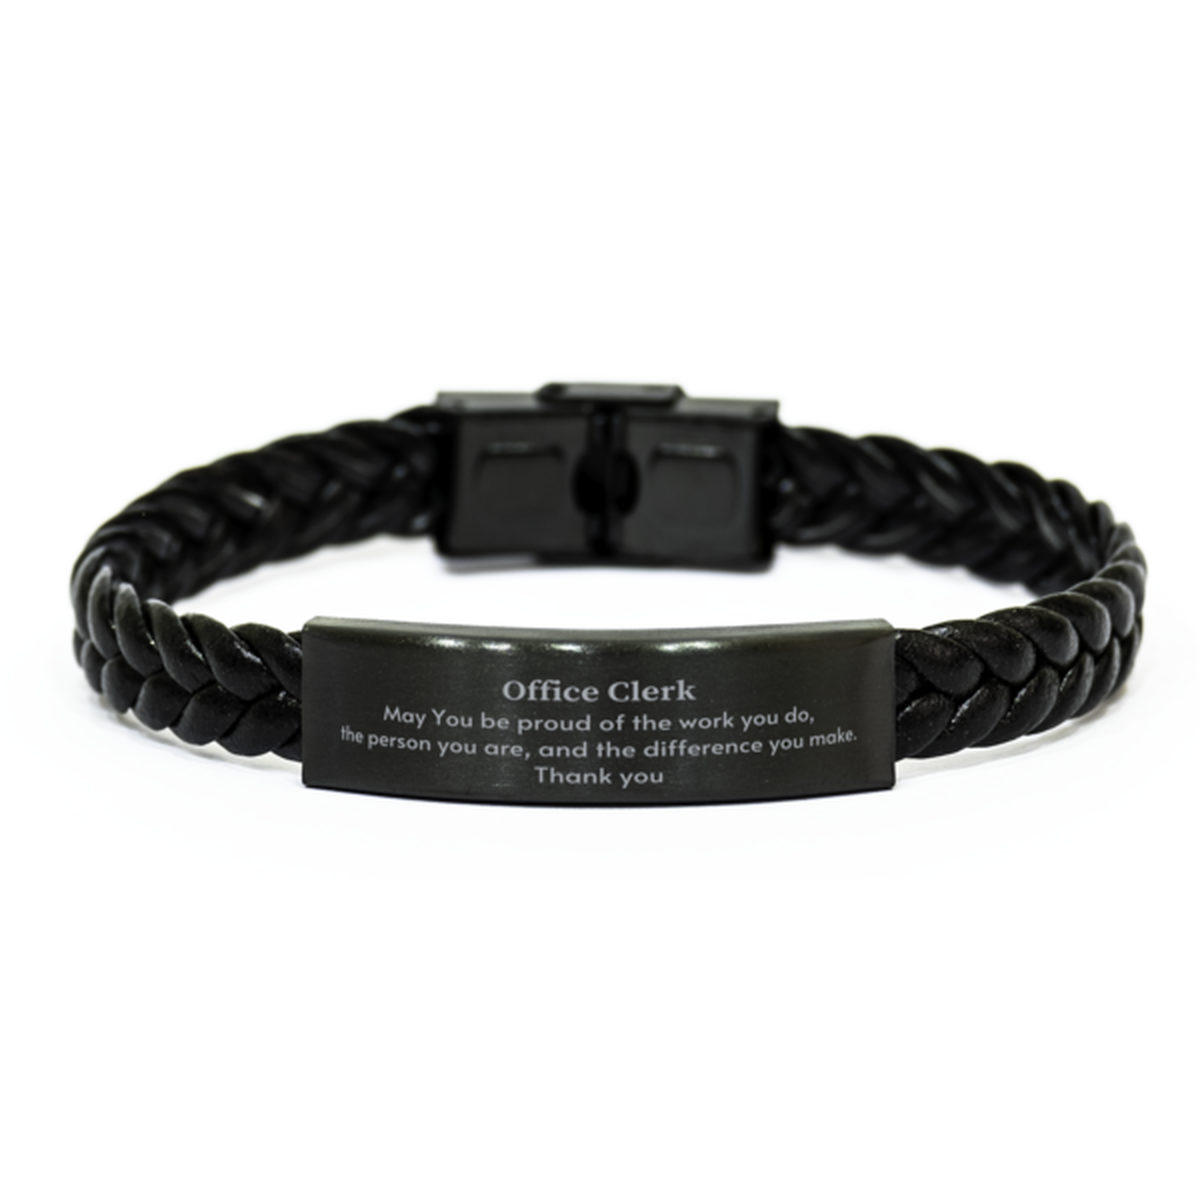 Heartwarming Braided Leather Bracelet Retirement Coworkers Gifts for Office Clerk, Office Clerk May You be proud of the work you do, the person you are Gifts for Boss Men Women Friends